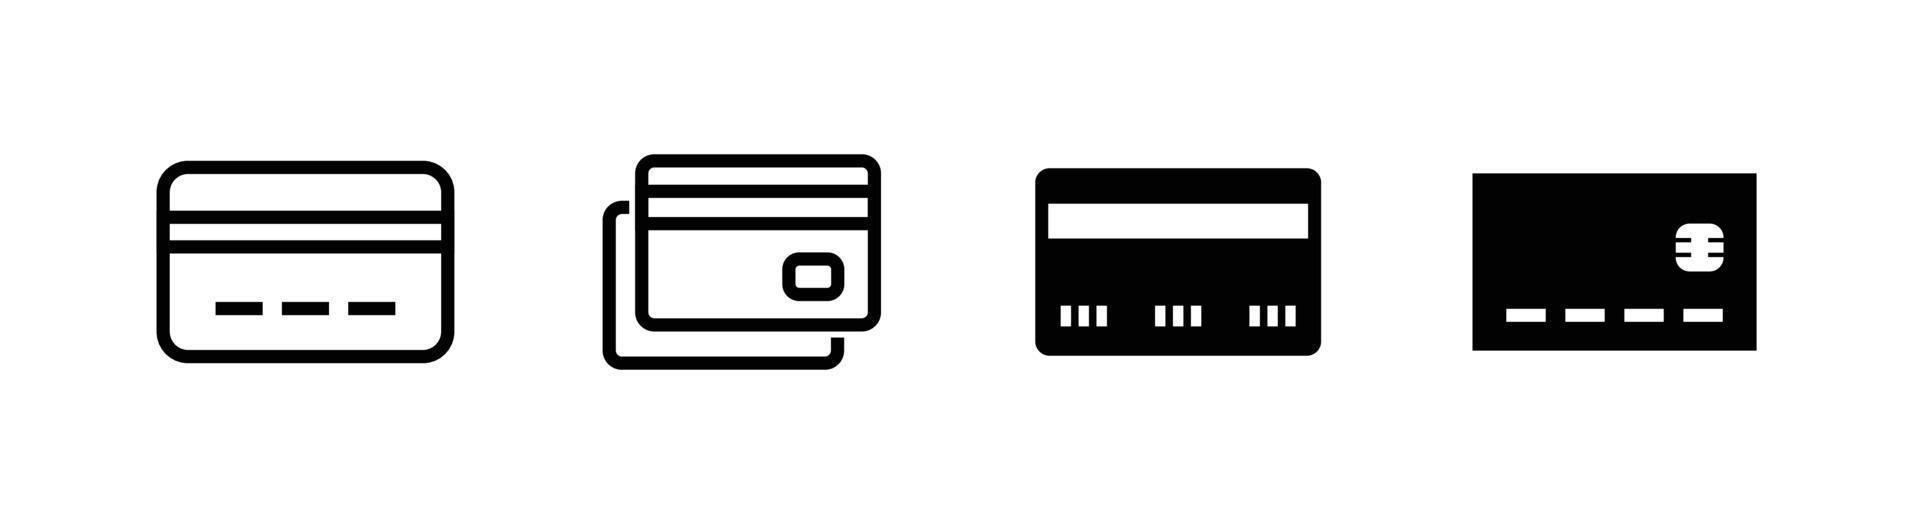 Card icon design element, clipart icon set related to credit card or debit card vector